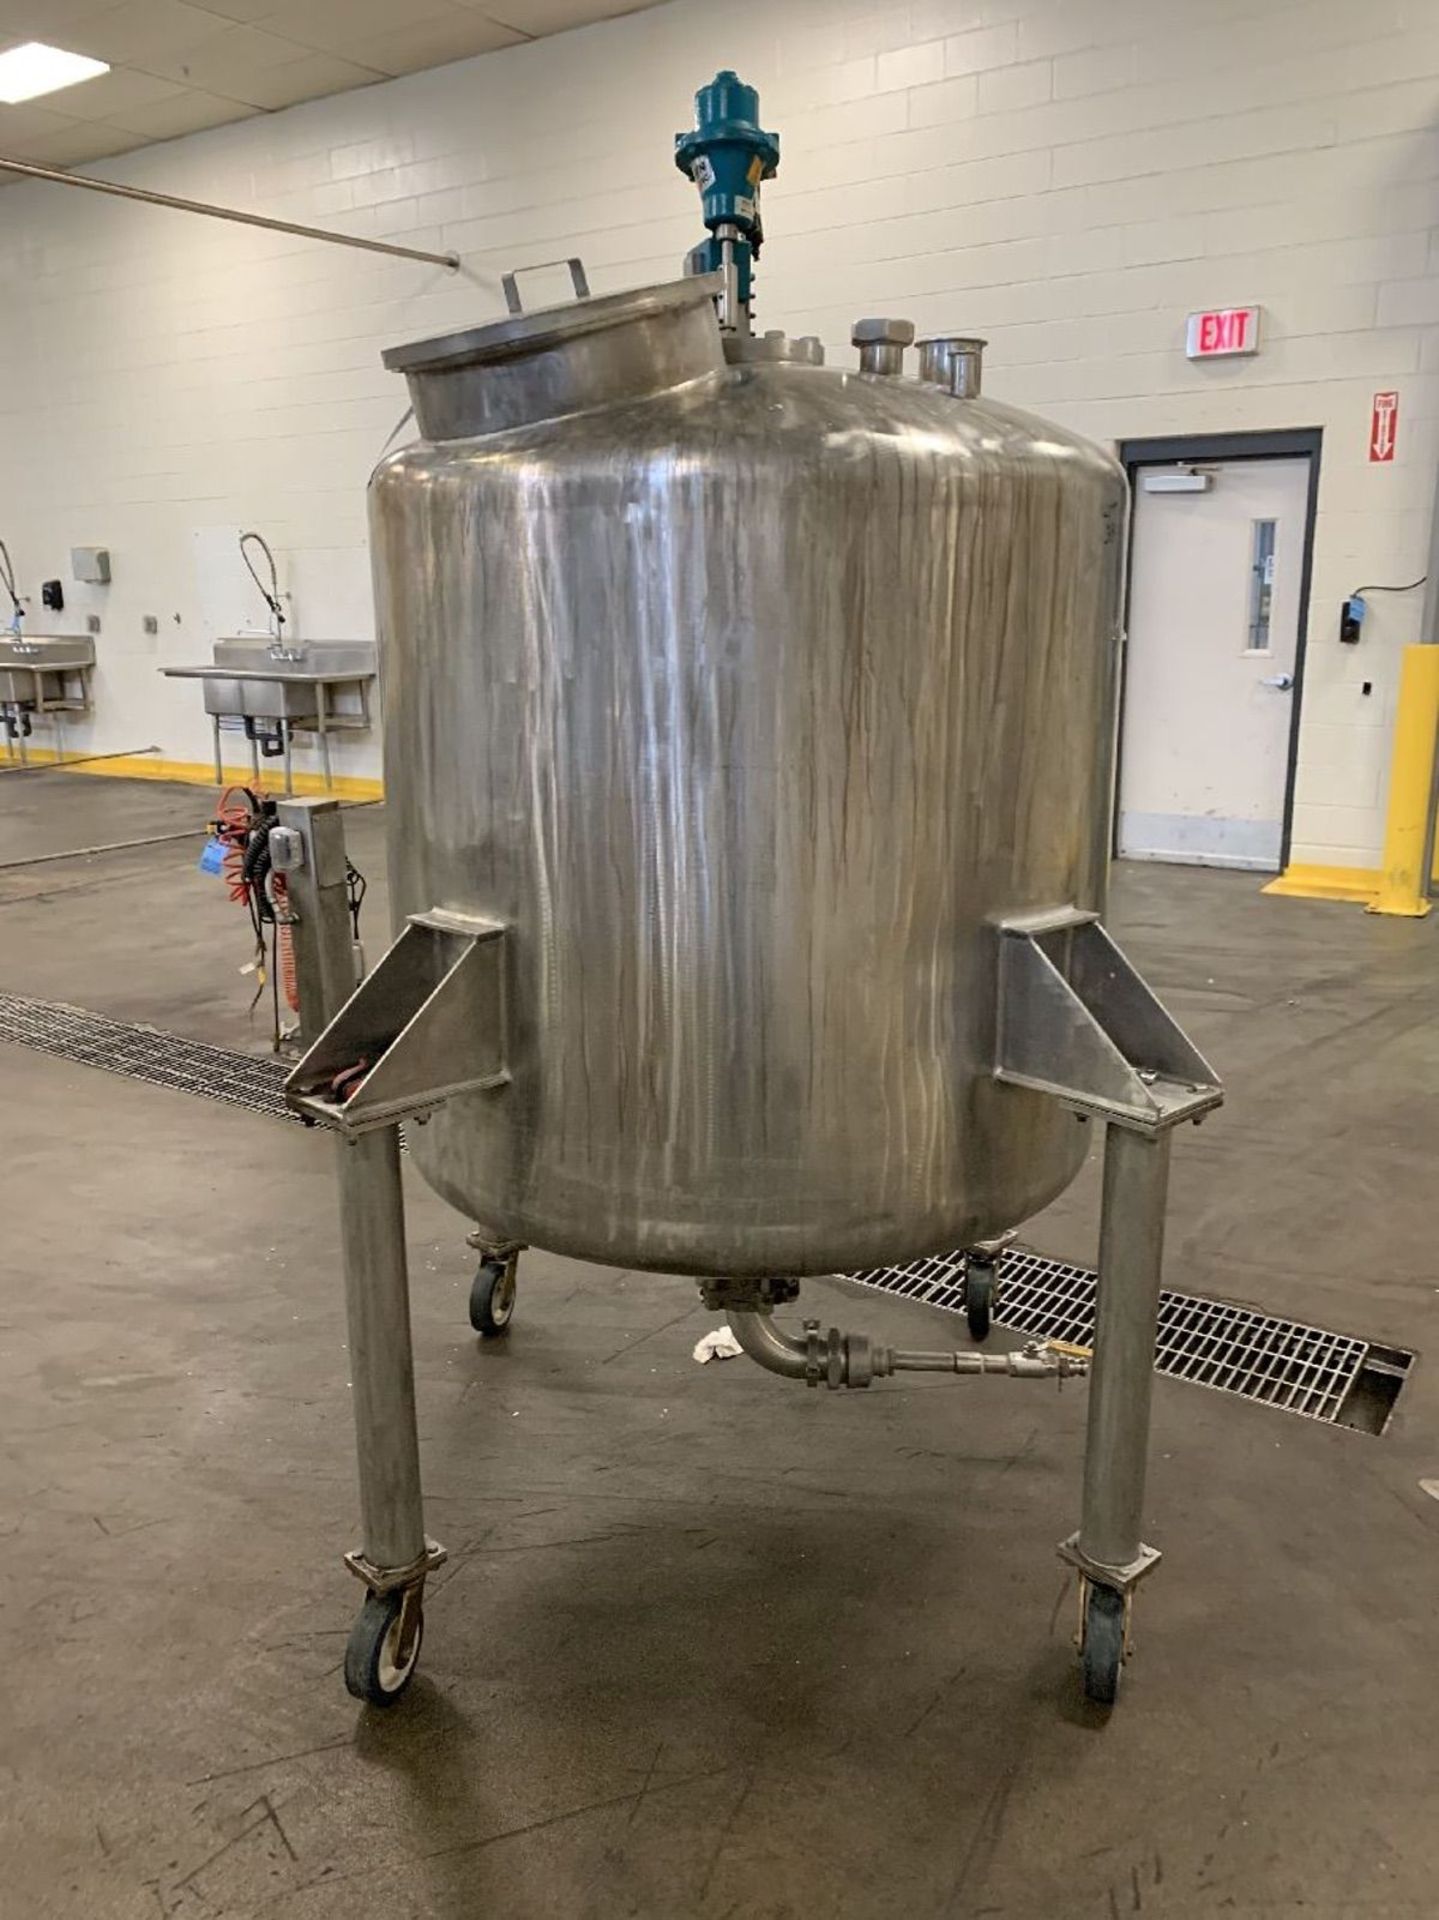 350 GALLON 48" DIAMETER X 44" HIGH PORTABLE STAINLESS STEEL BLENDING TANK WITH BRAWN | Rig Fee: $300